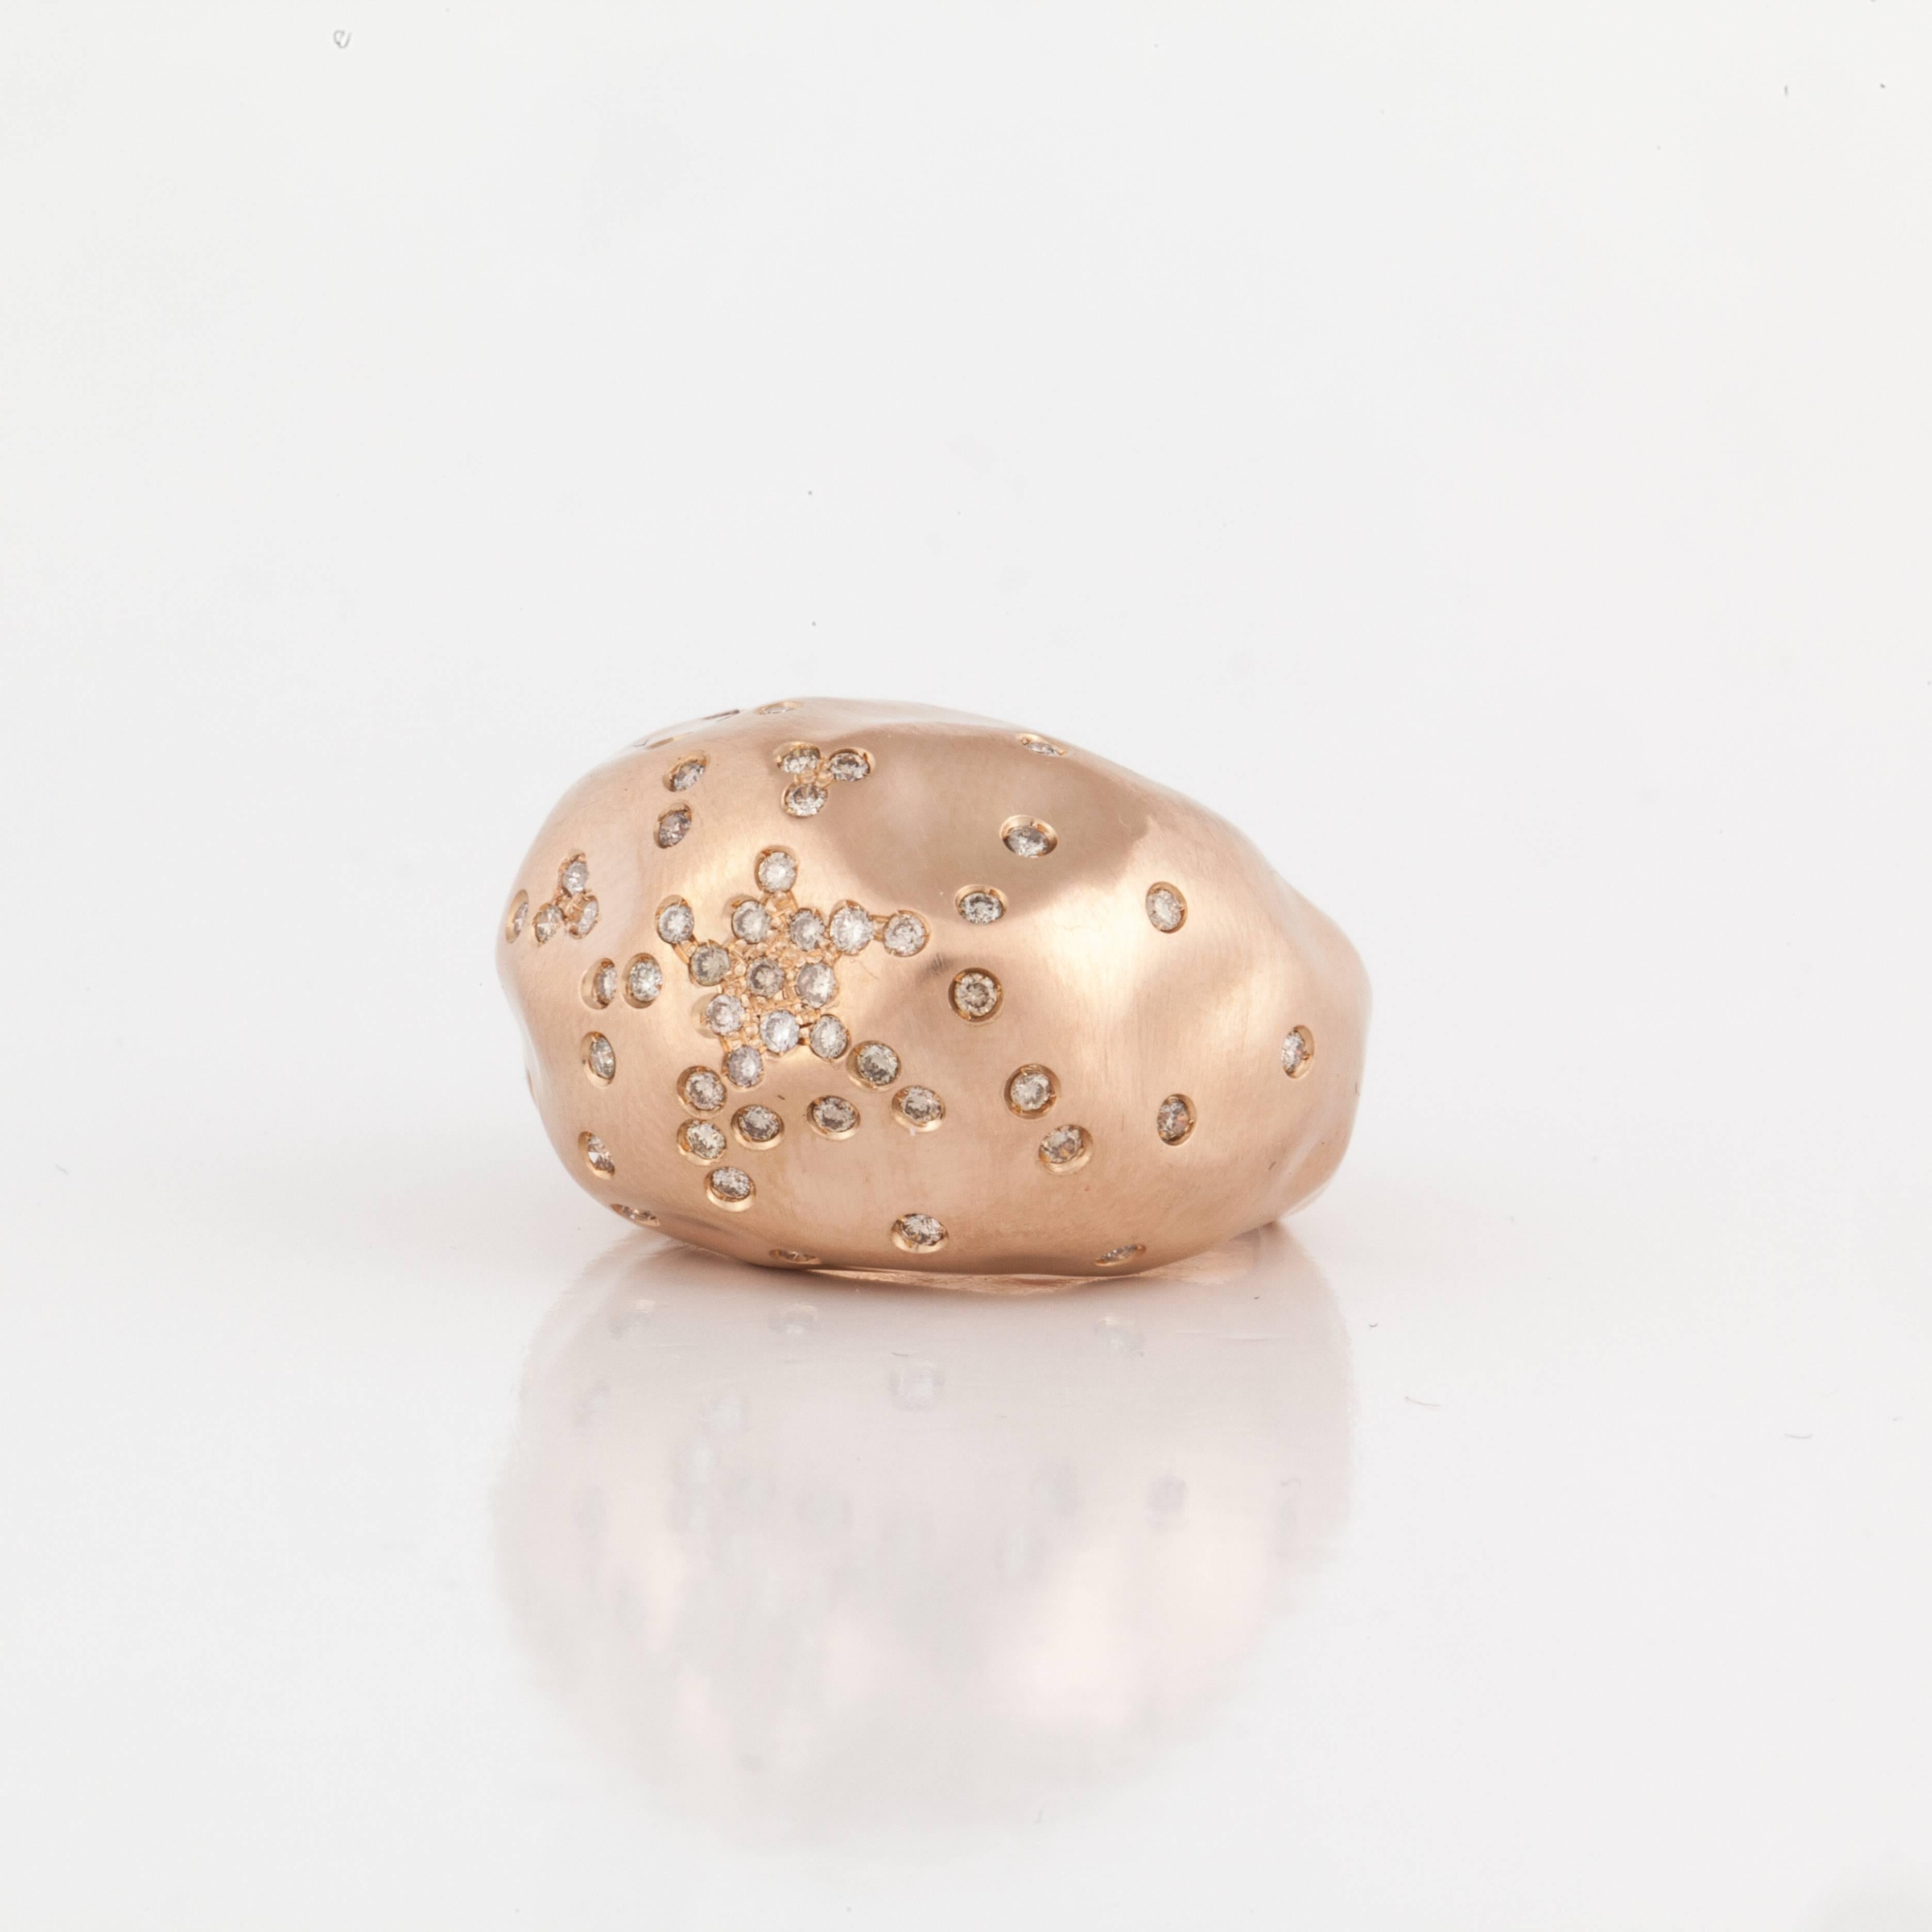 Antonini dome ring in 18K rose gold sprinkled with diamonds.  Marked on the inside 